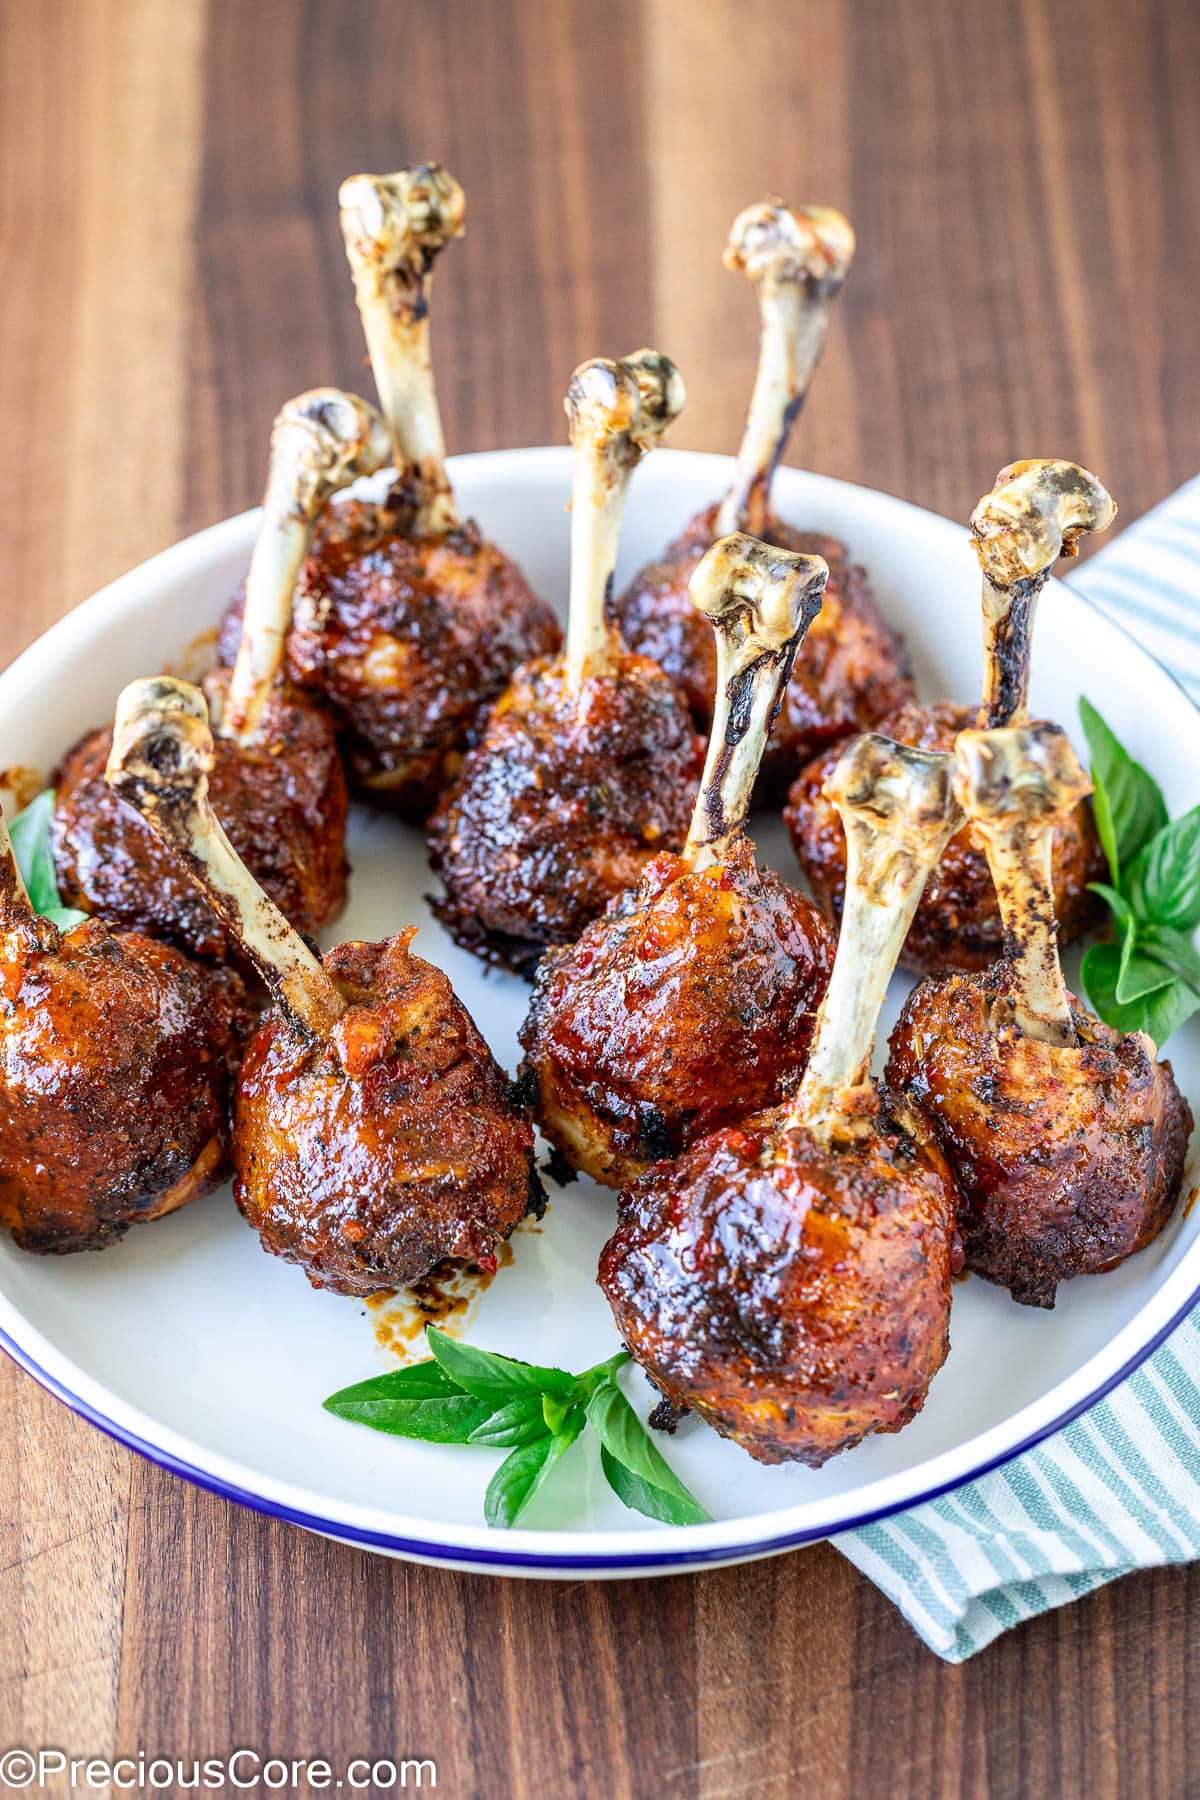 Plate of baked and glazed chicken lollipops.